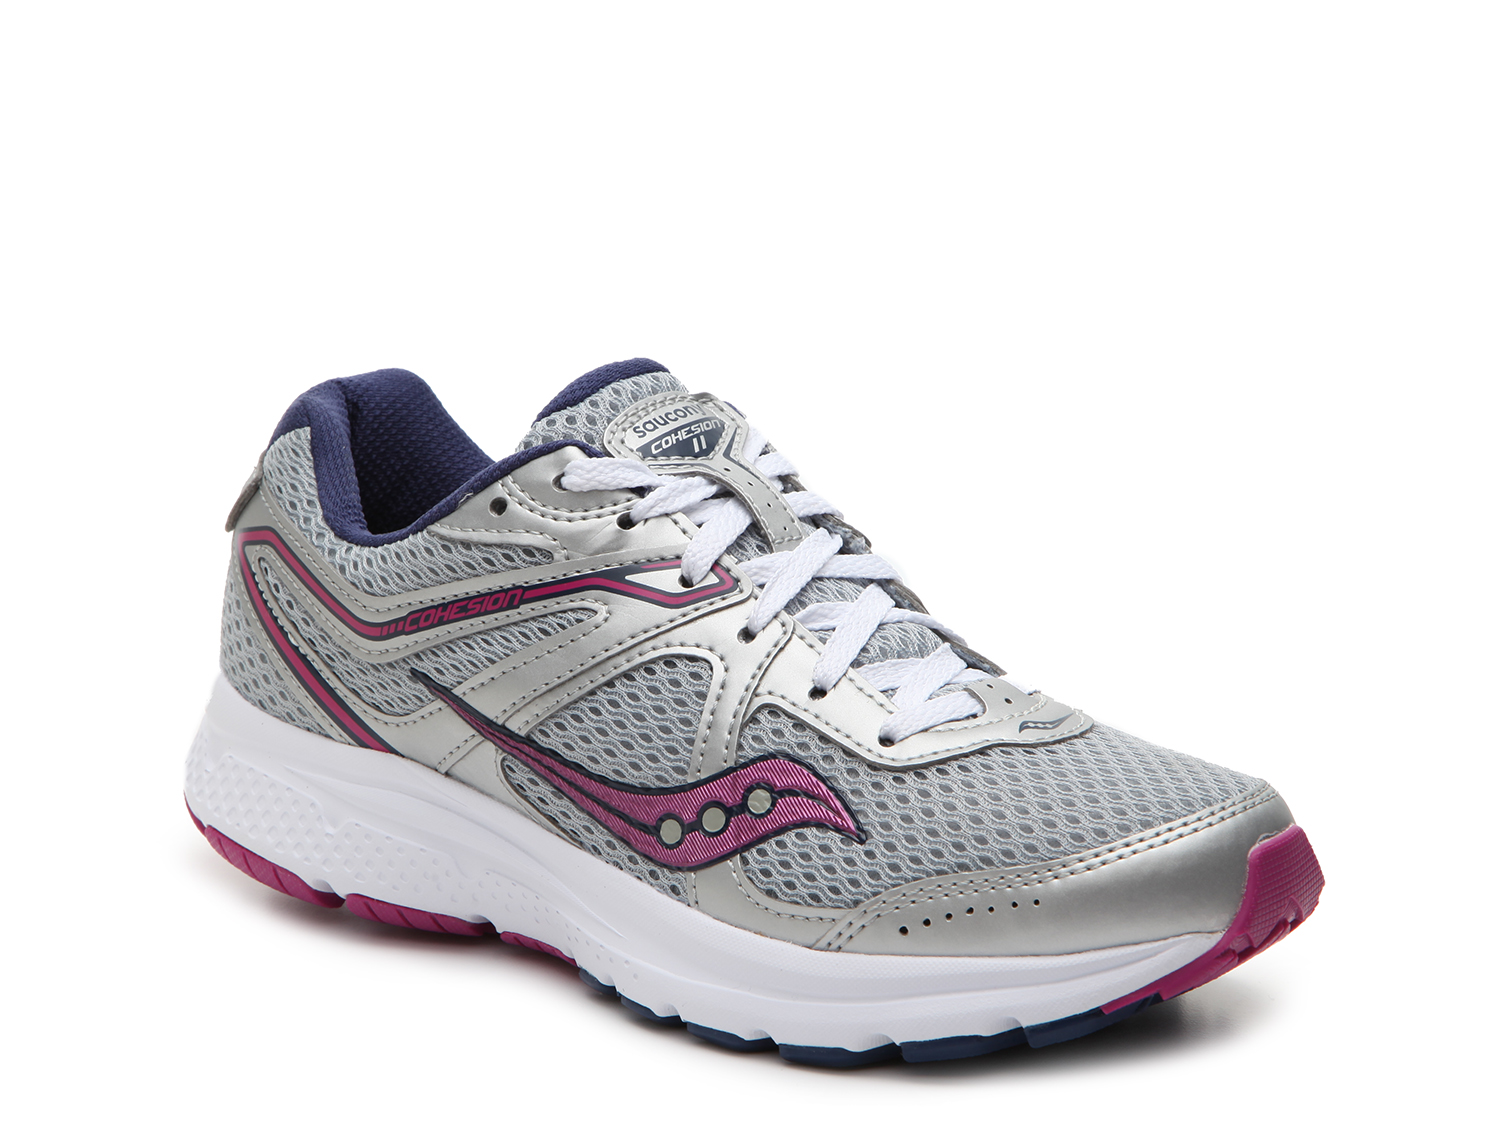 Saucony Womens Cohesion 11 Running Shoe Black Saucony Women's Cohesion 11 Running Shoe S10369-1 